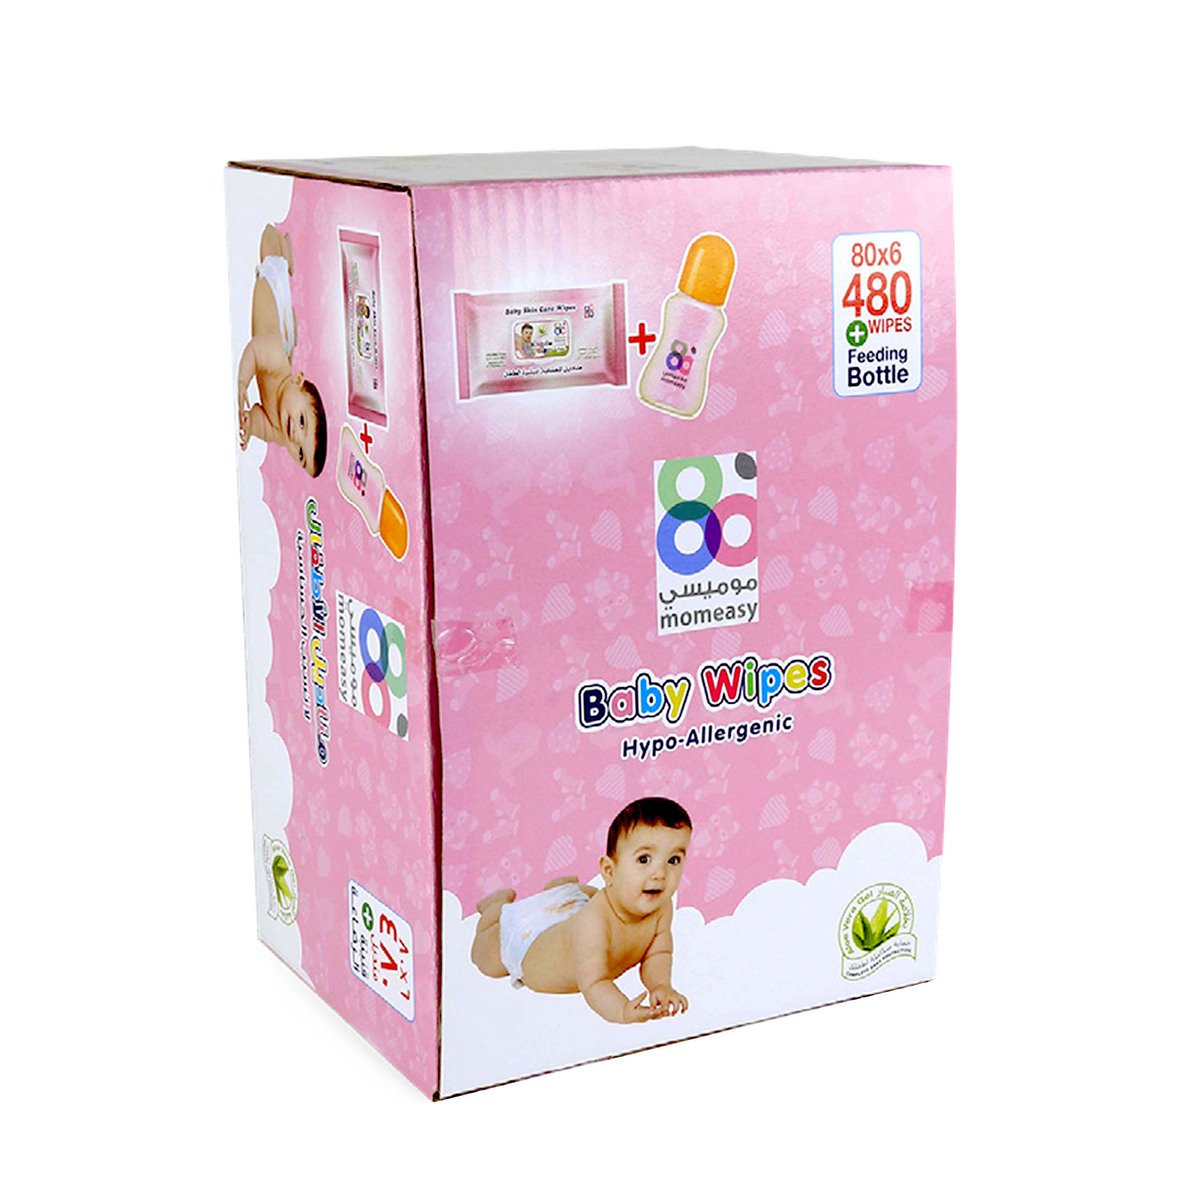 Momeasy Baby Wipes 6 x 80 pcs + Offer